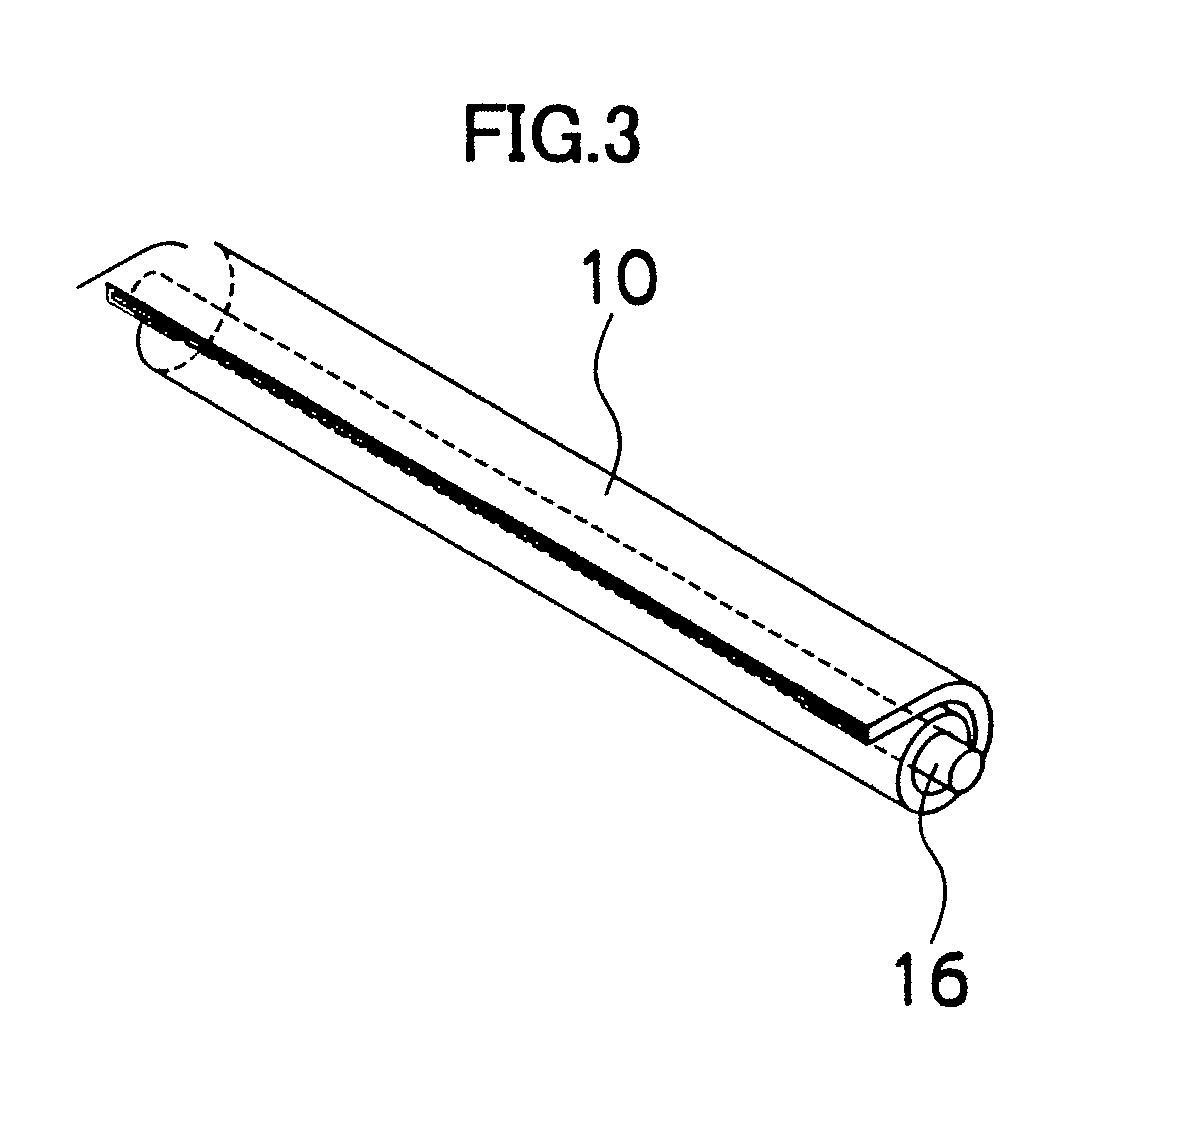 Display element, portable equipment and imaging device